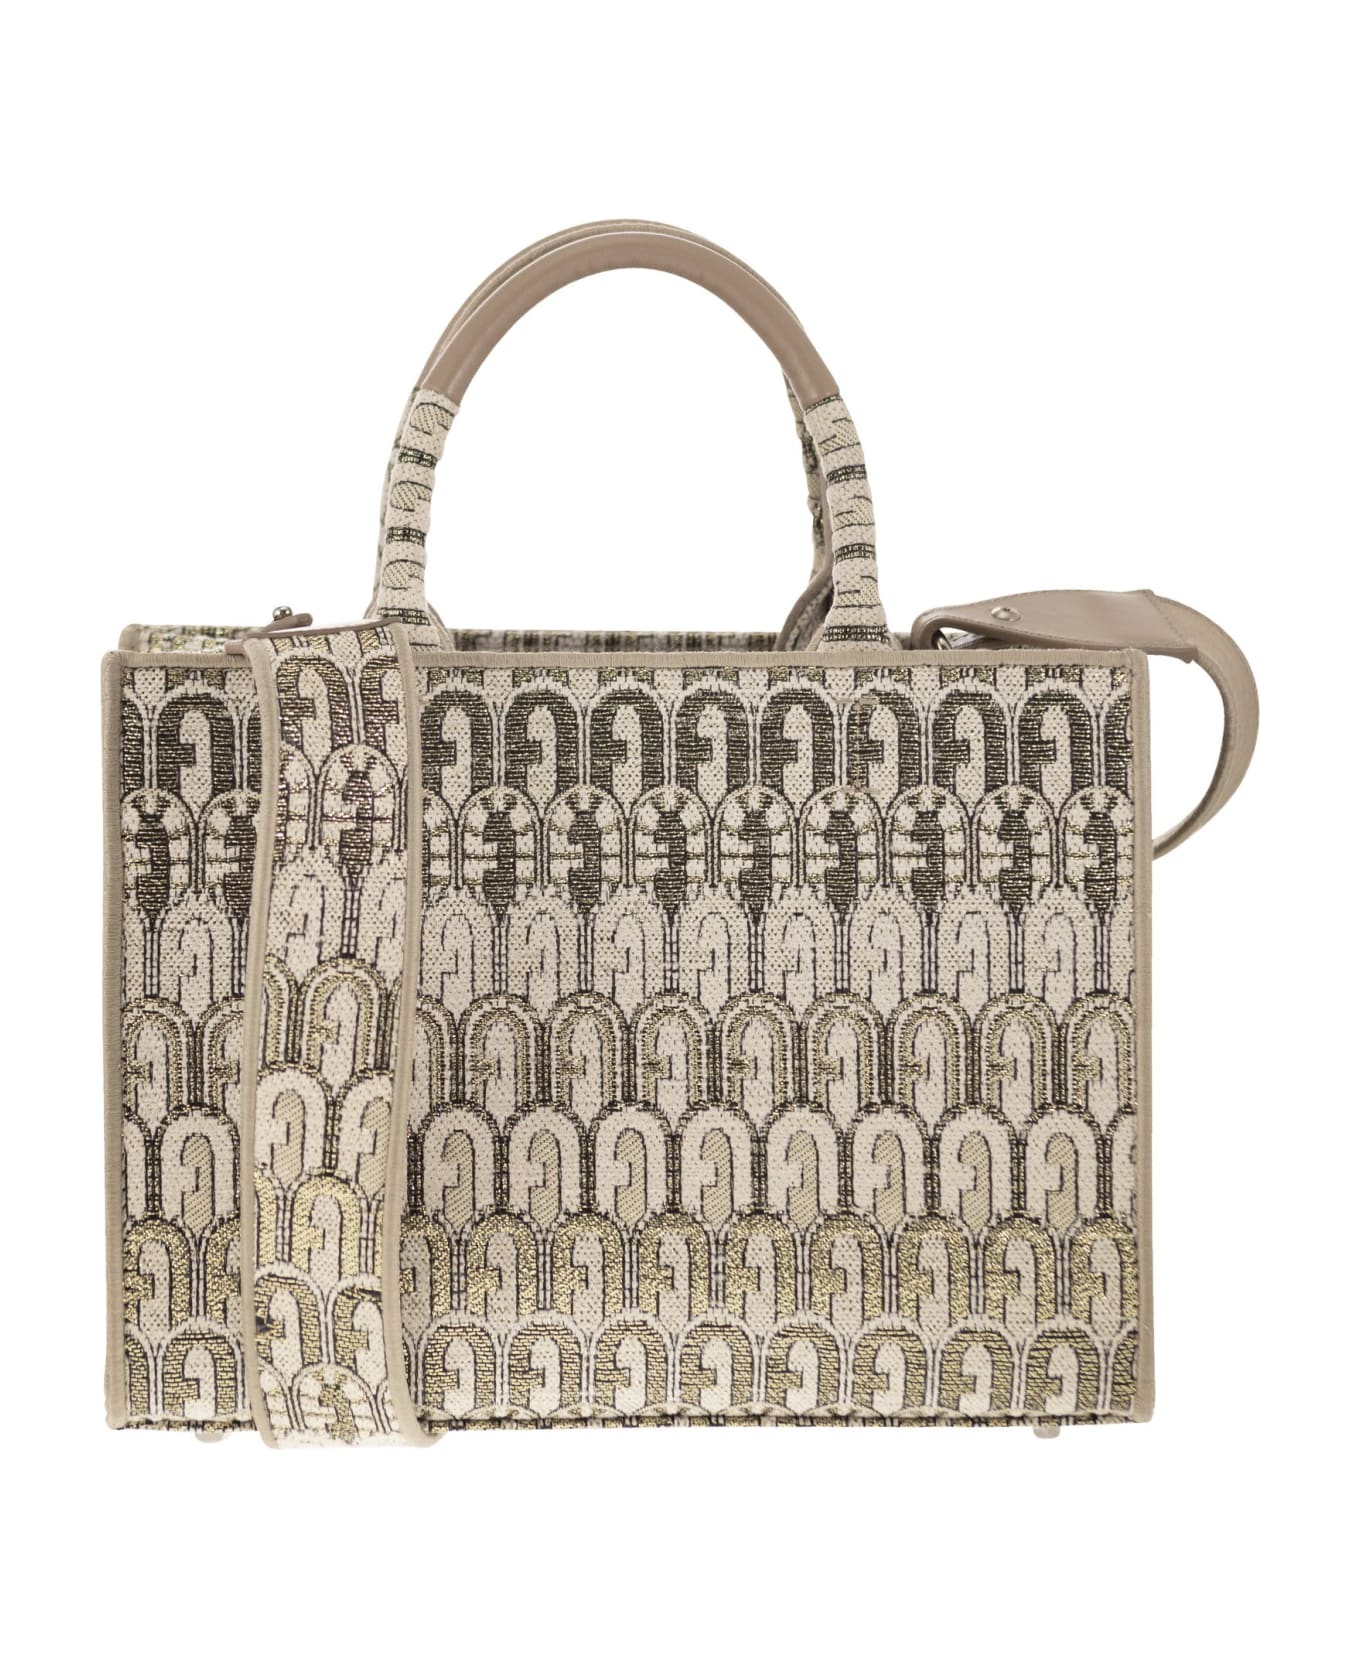 Furla Opportunity - Tote Bag Small - Toni Color Gold トートバッグ